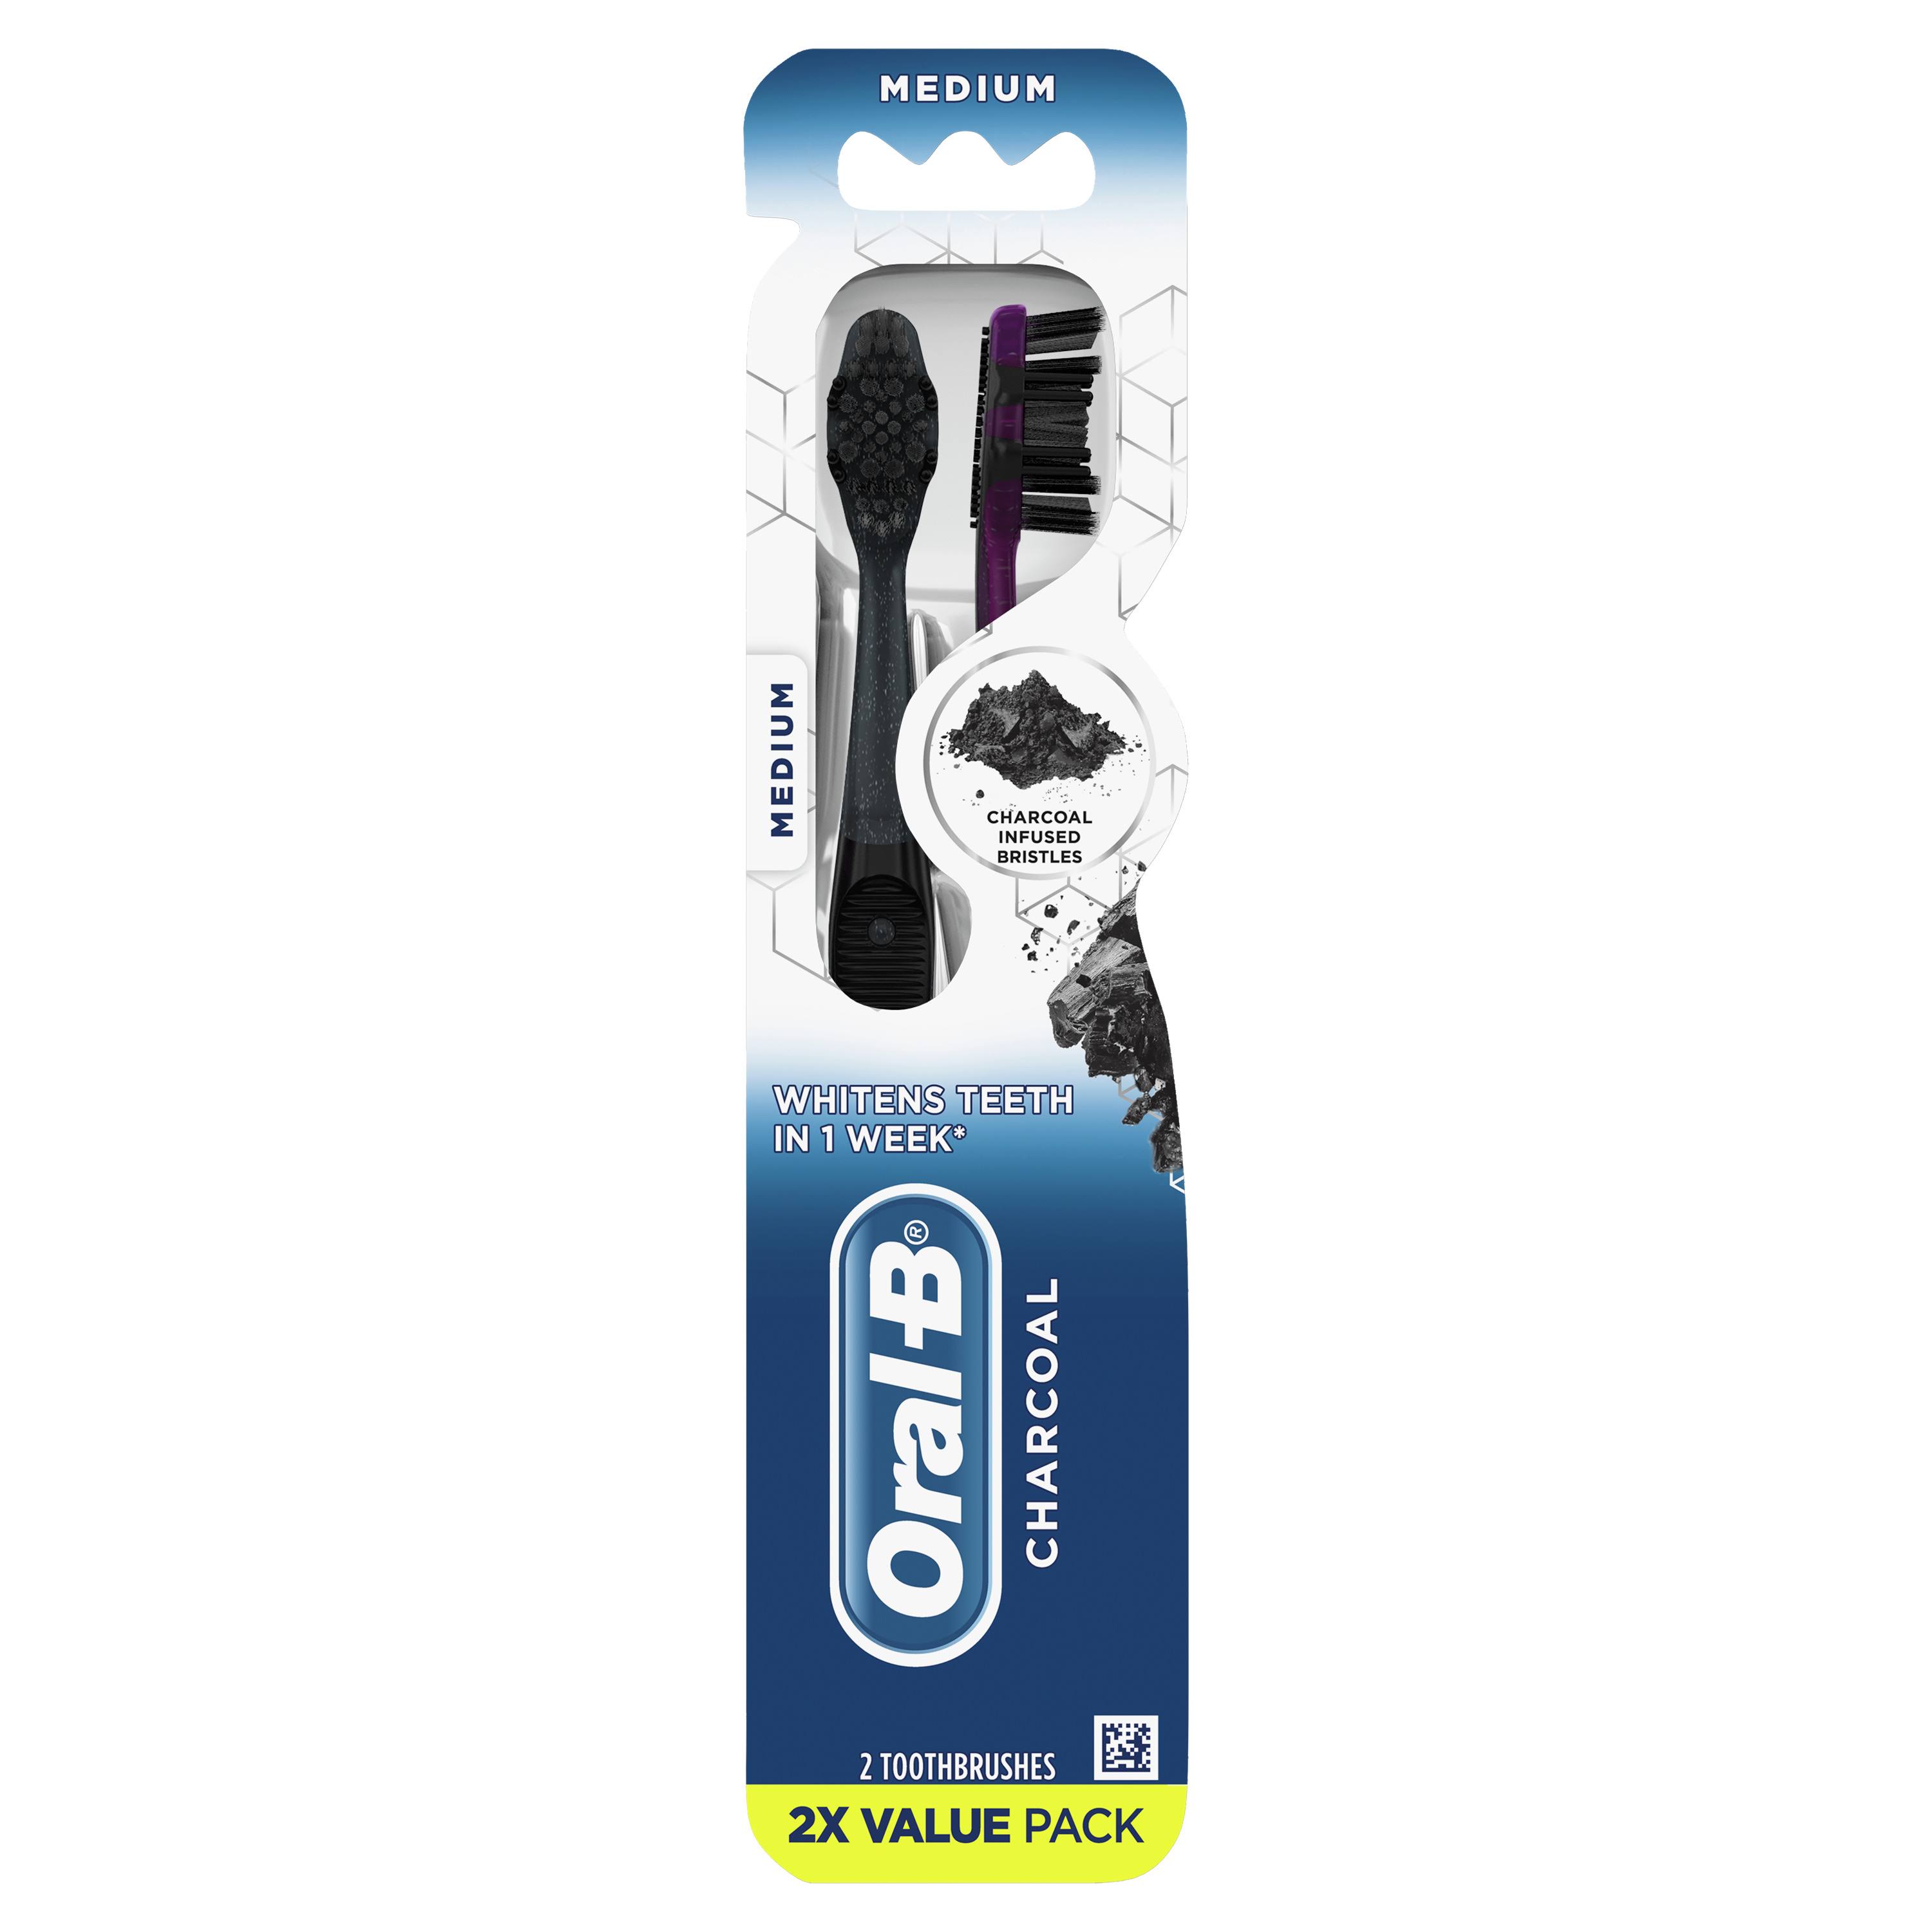 Oral B Charcoal Whitening Therapy Toothbrush - Medium